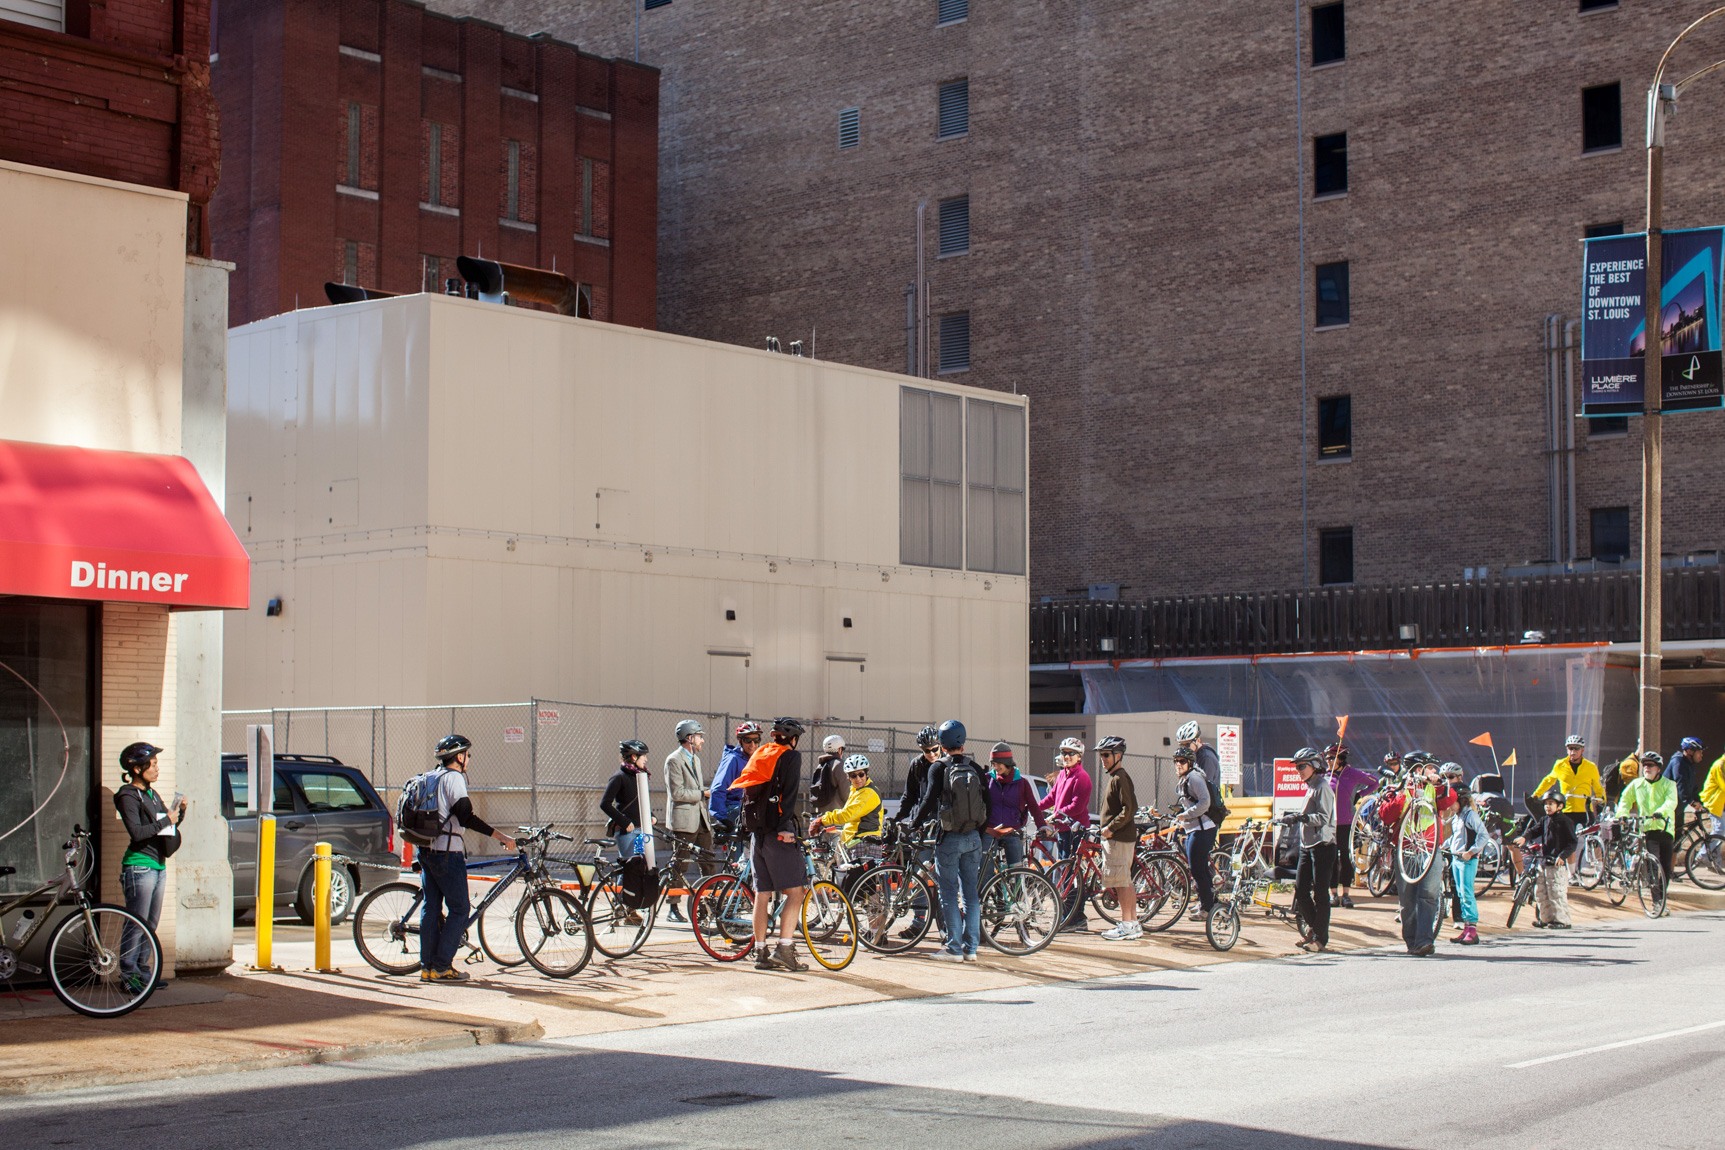 A crowd of cyclists gathered in a parking lot during the bike tour.